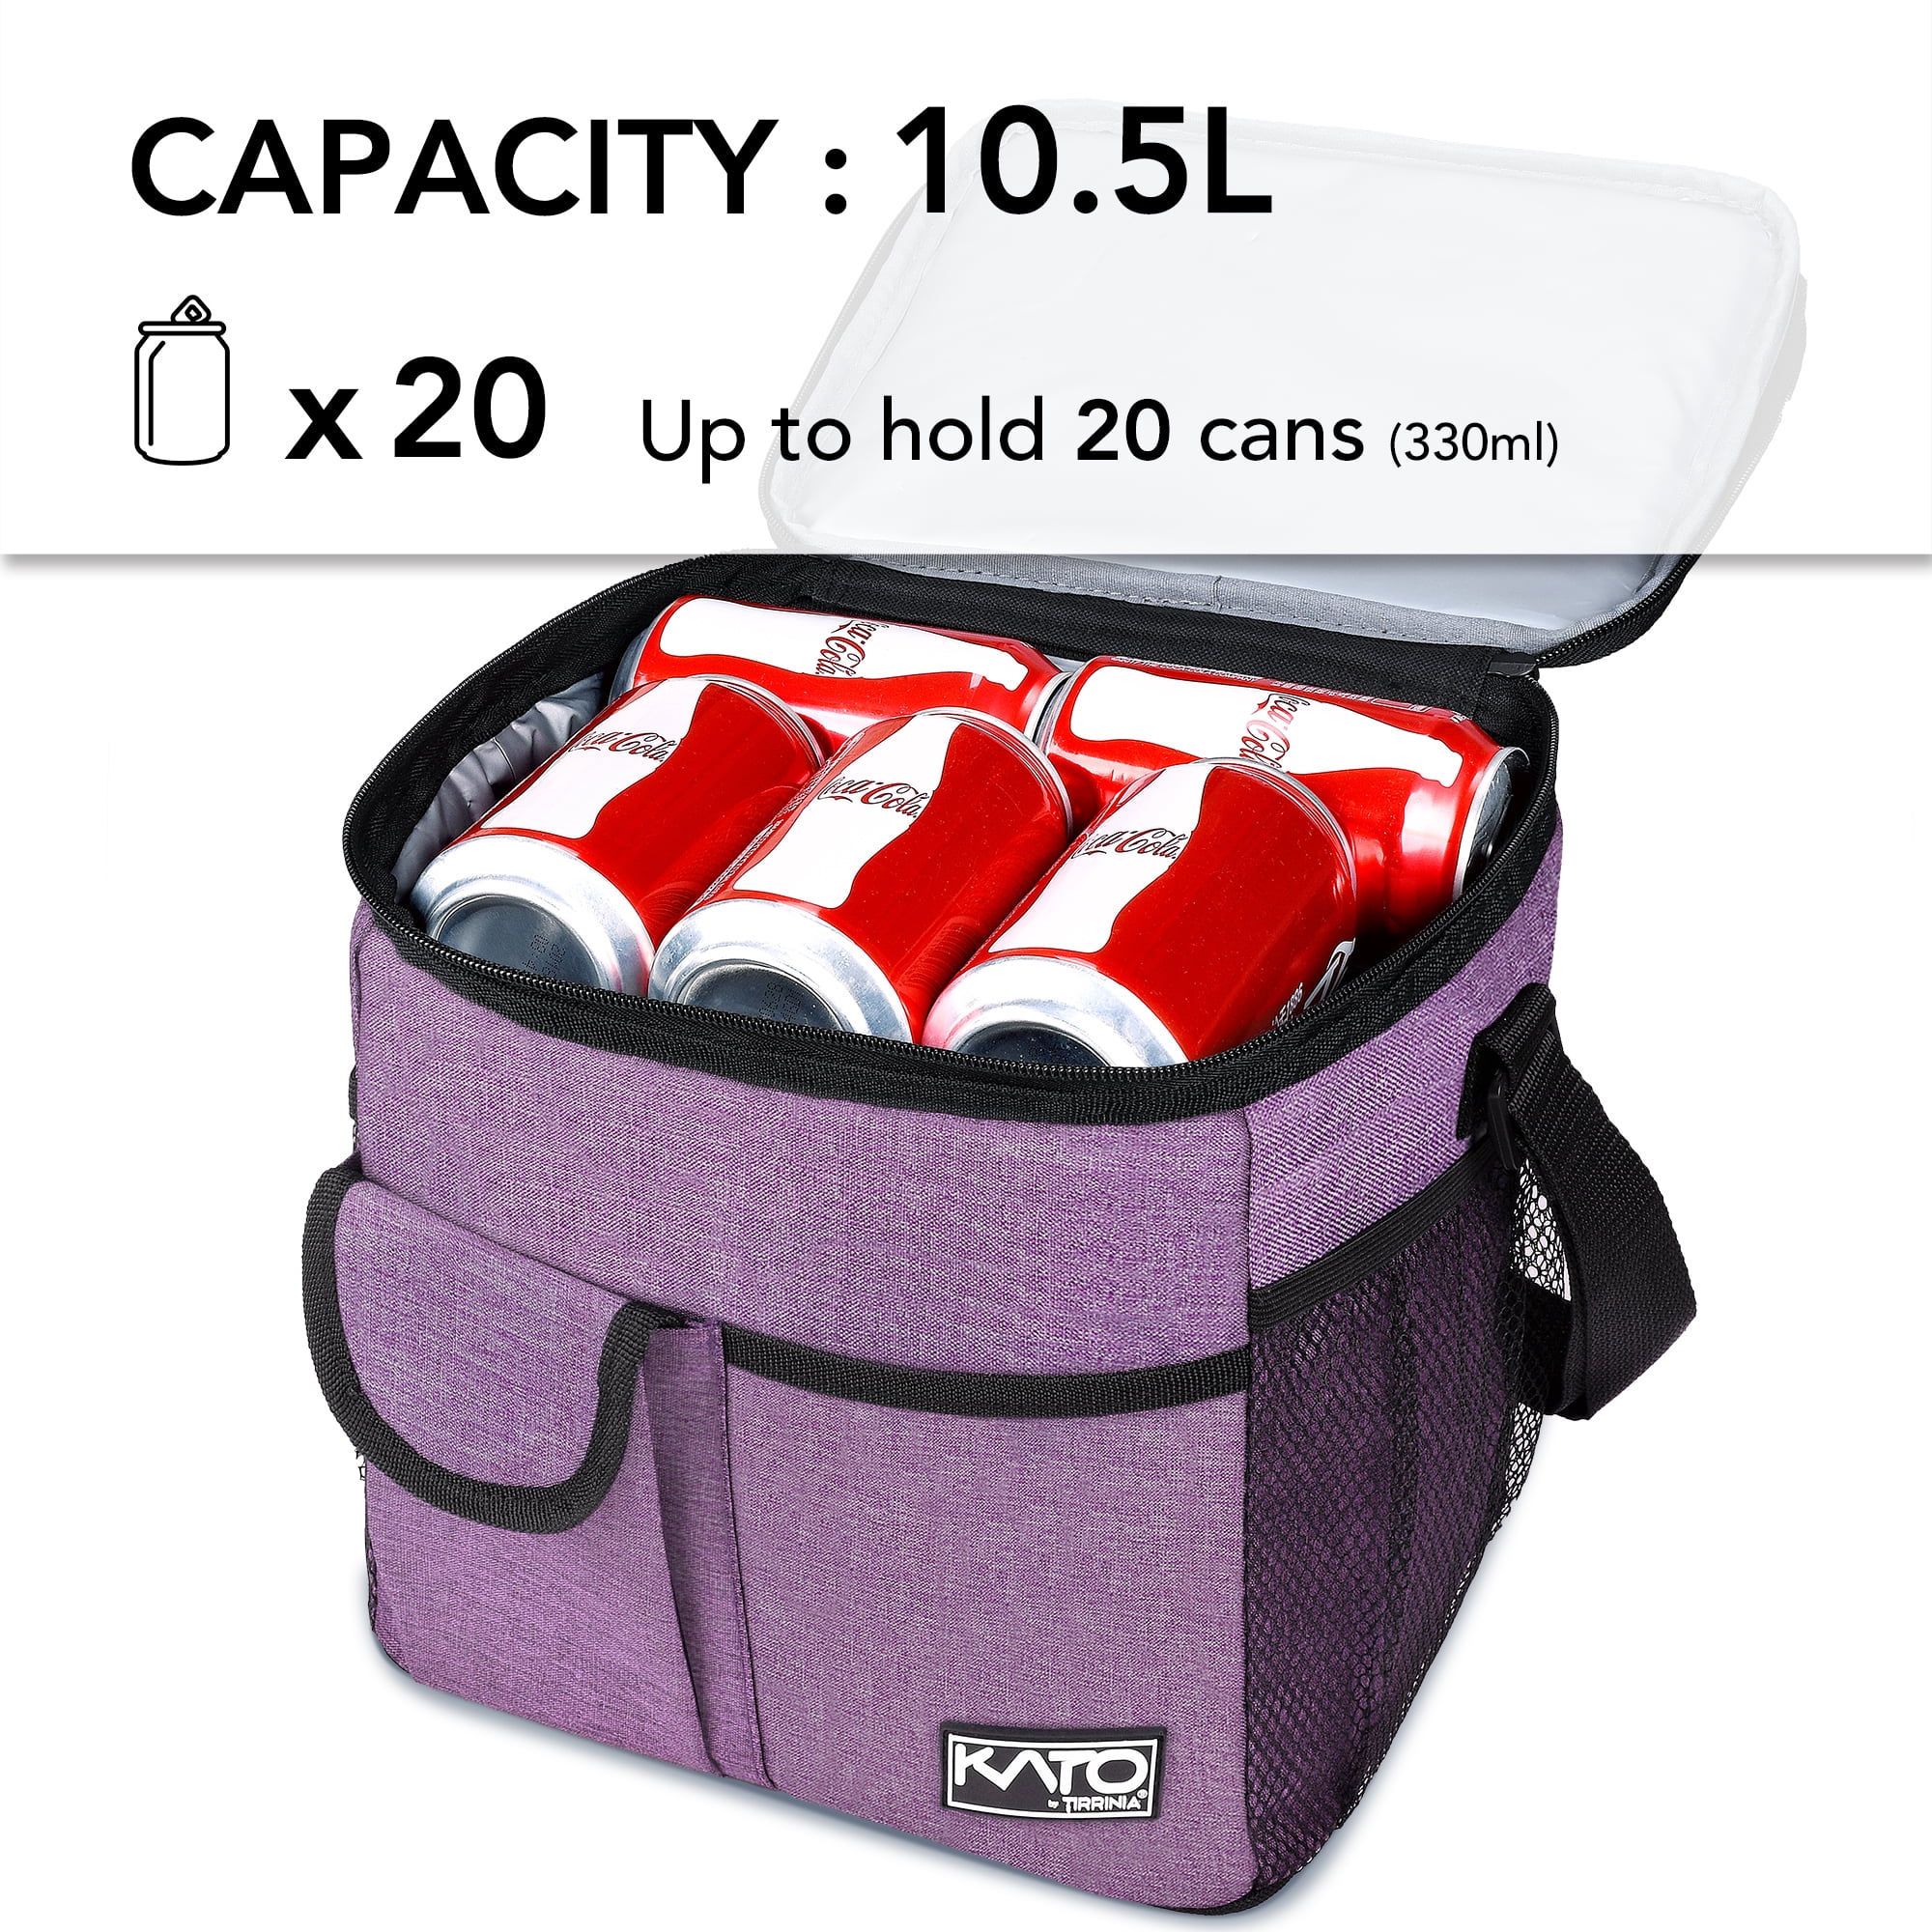 TOP&TOP Insulated Lunch Box and Cooler Bag for Women, Men - 13L x 7W x  9H, 3 Reusable Meal Prep C…See more TOP&TOP Insulated Lunch Box and Cooler